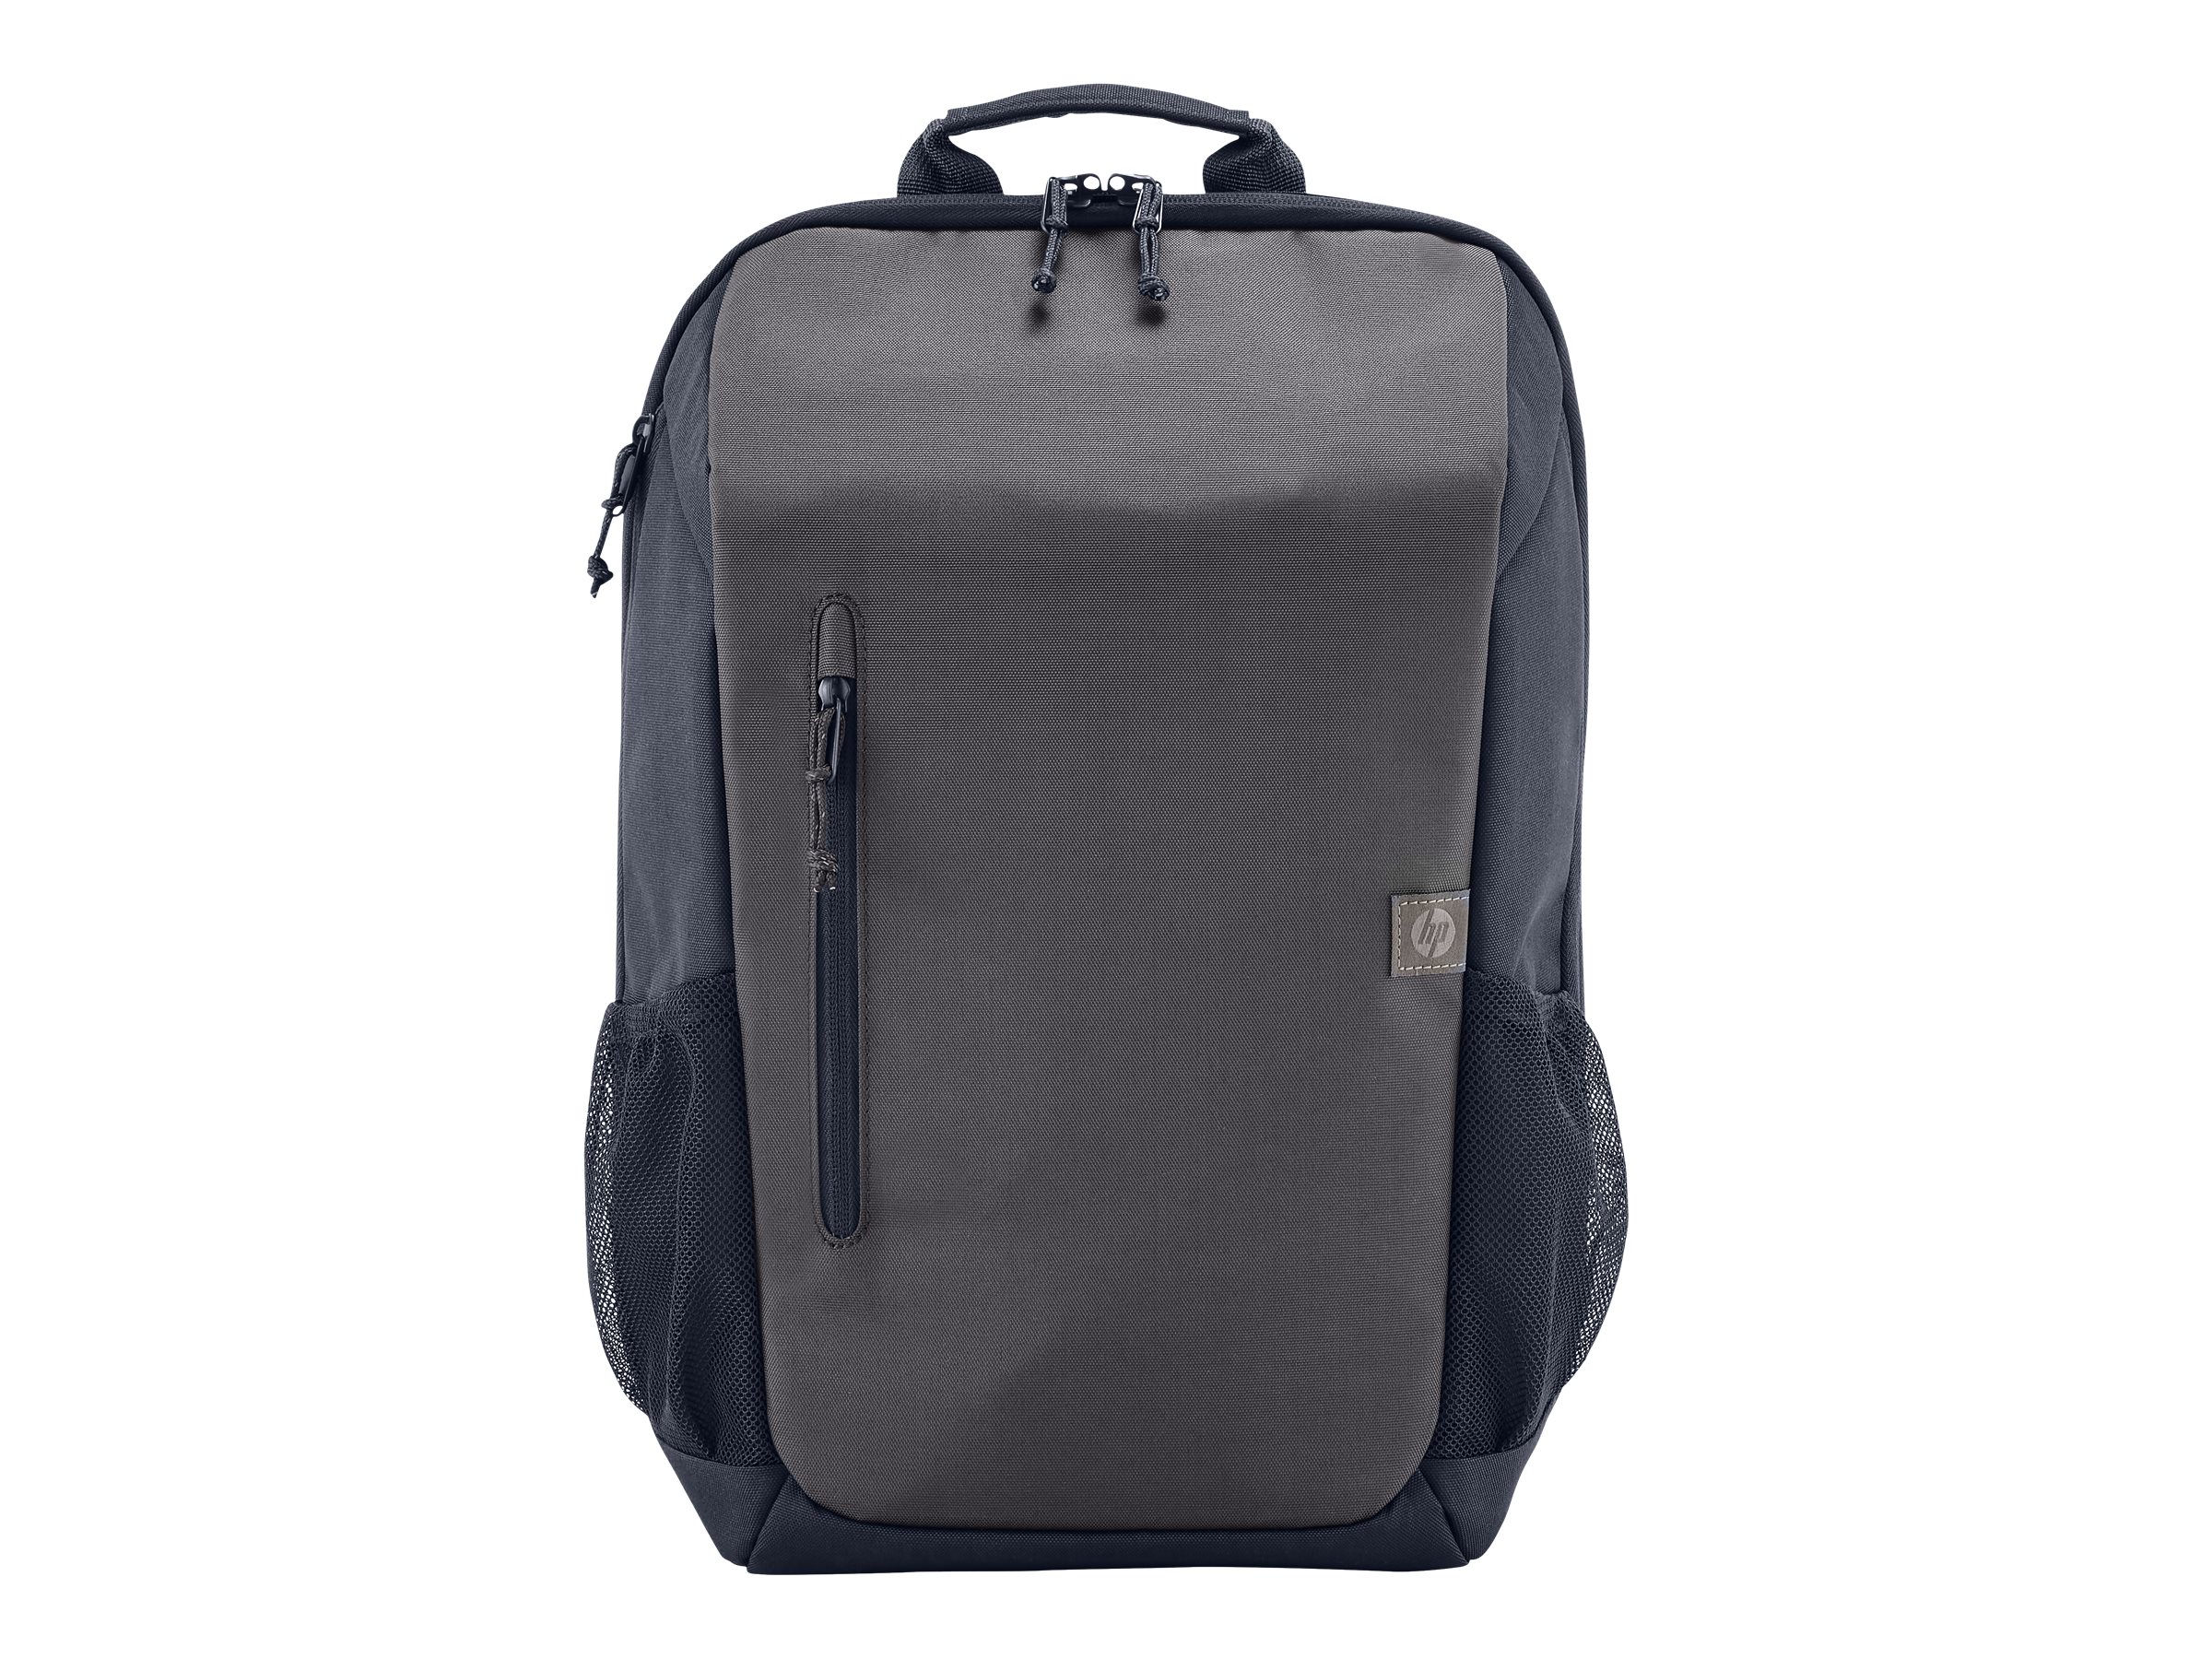 HP Travel 18 Liter 15.6inch Iron Grey Laptop Backpack